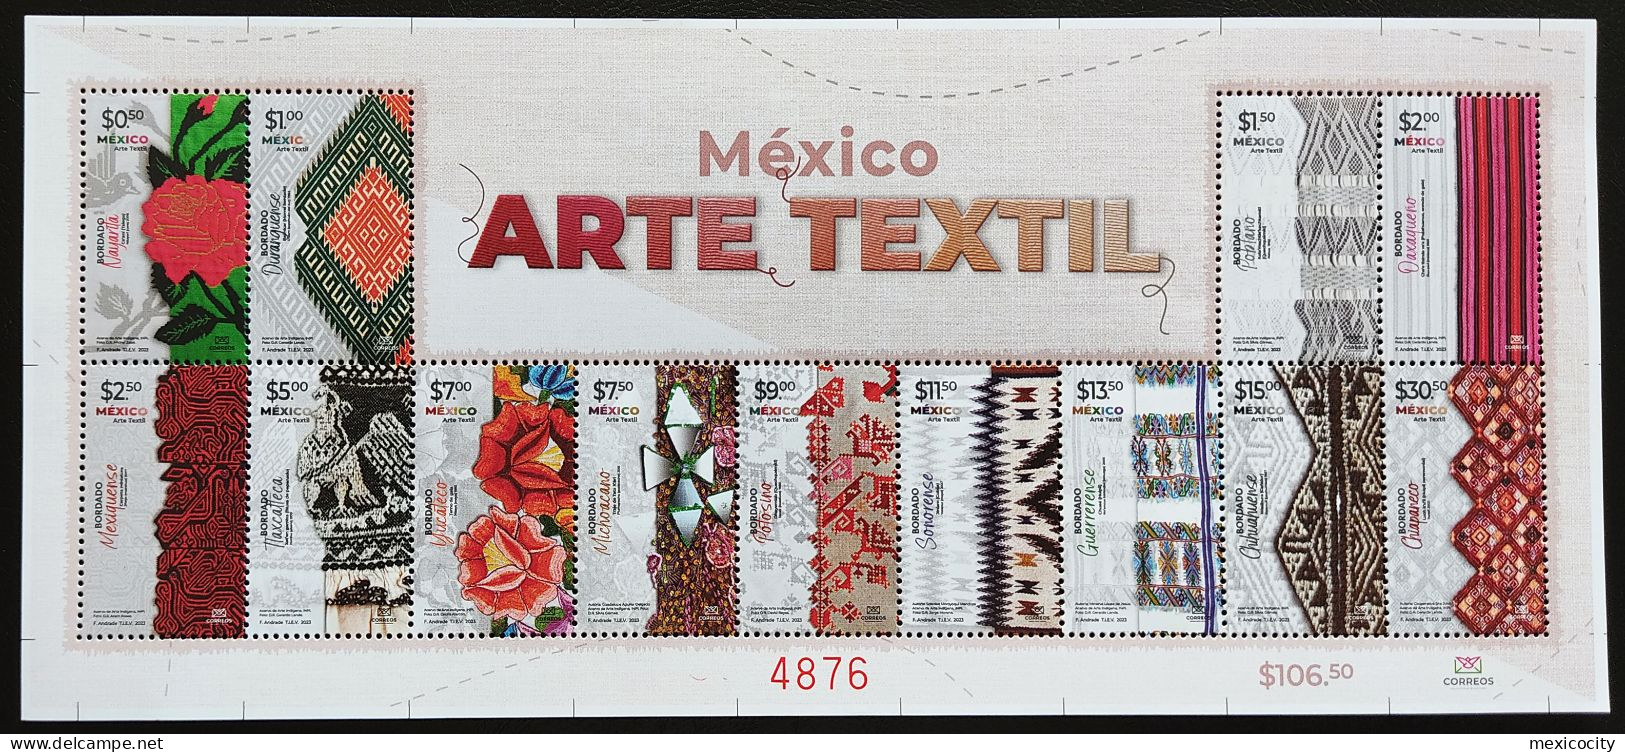 MEXICO 2023 ART: TEXTILE - THE NEW Beater Series Special MULTISHEET W/ All 13 Stamps, Mint NH Unm. - Mexico